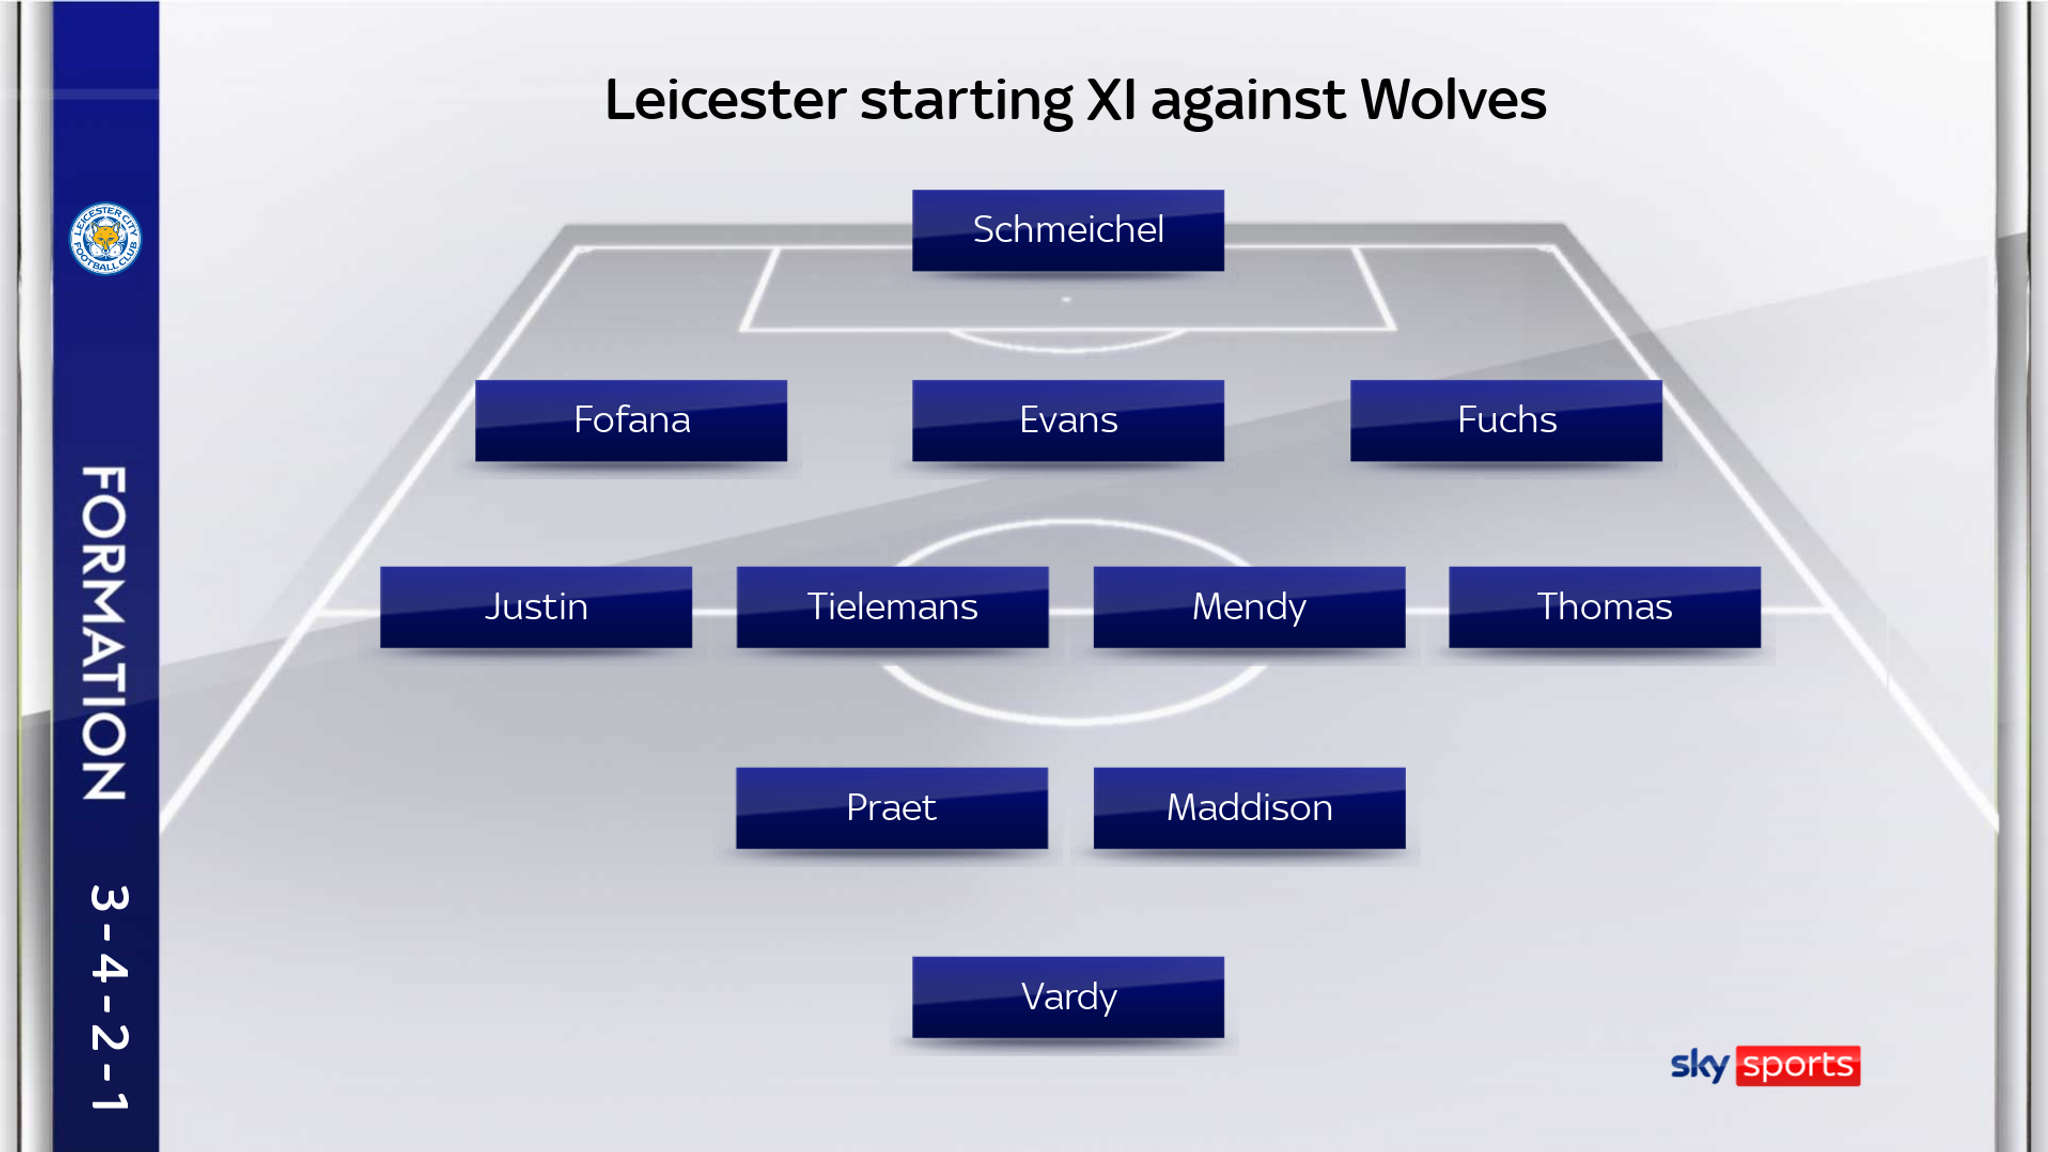 skysports-leicester-formation_5171106.png